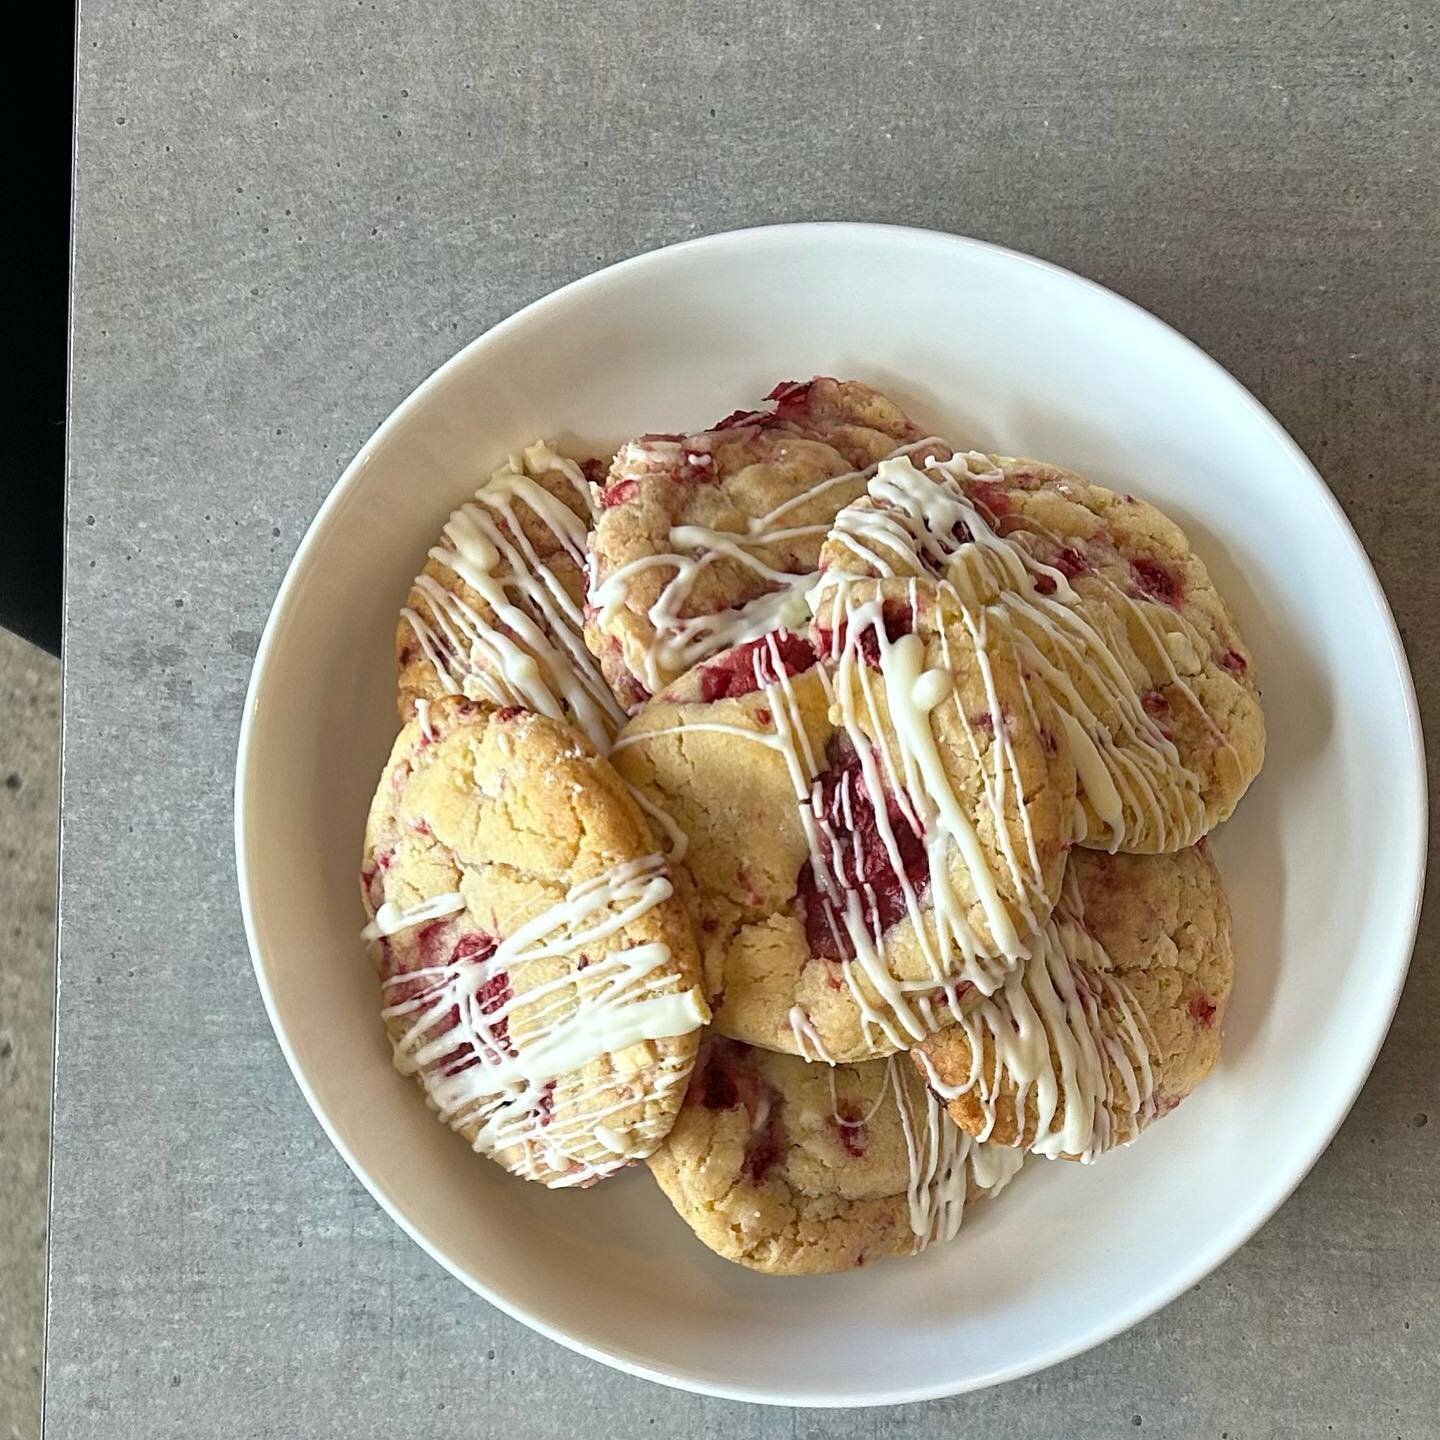 House raspberry &amp; white chocolate cookies for your Hump day 🙌